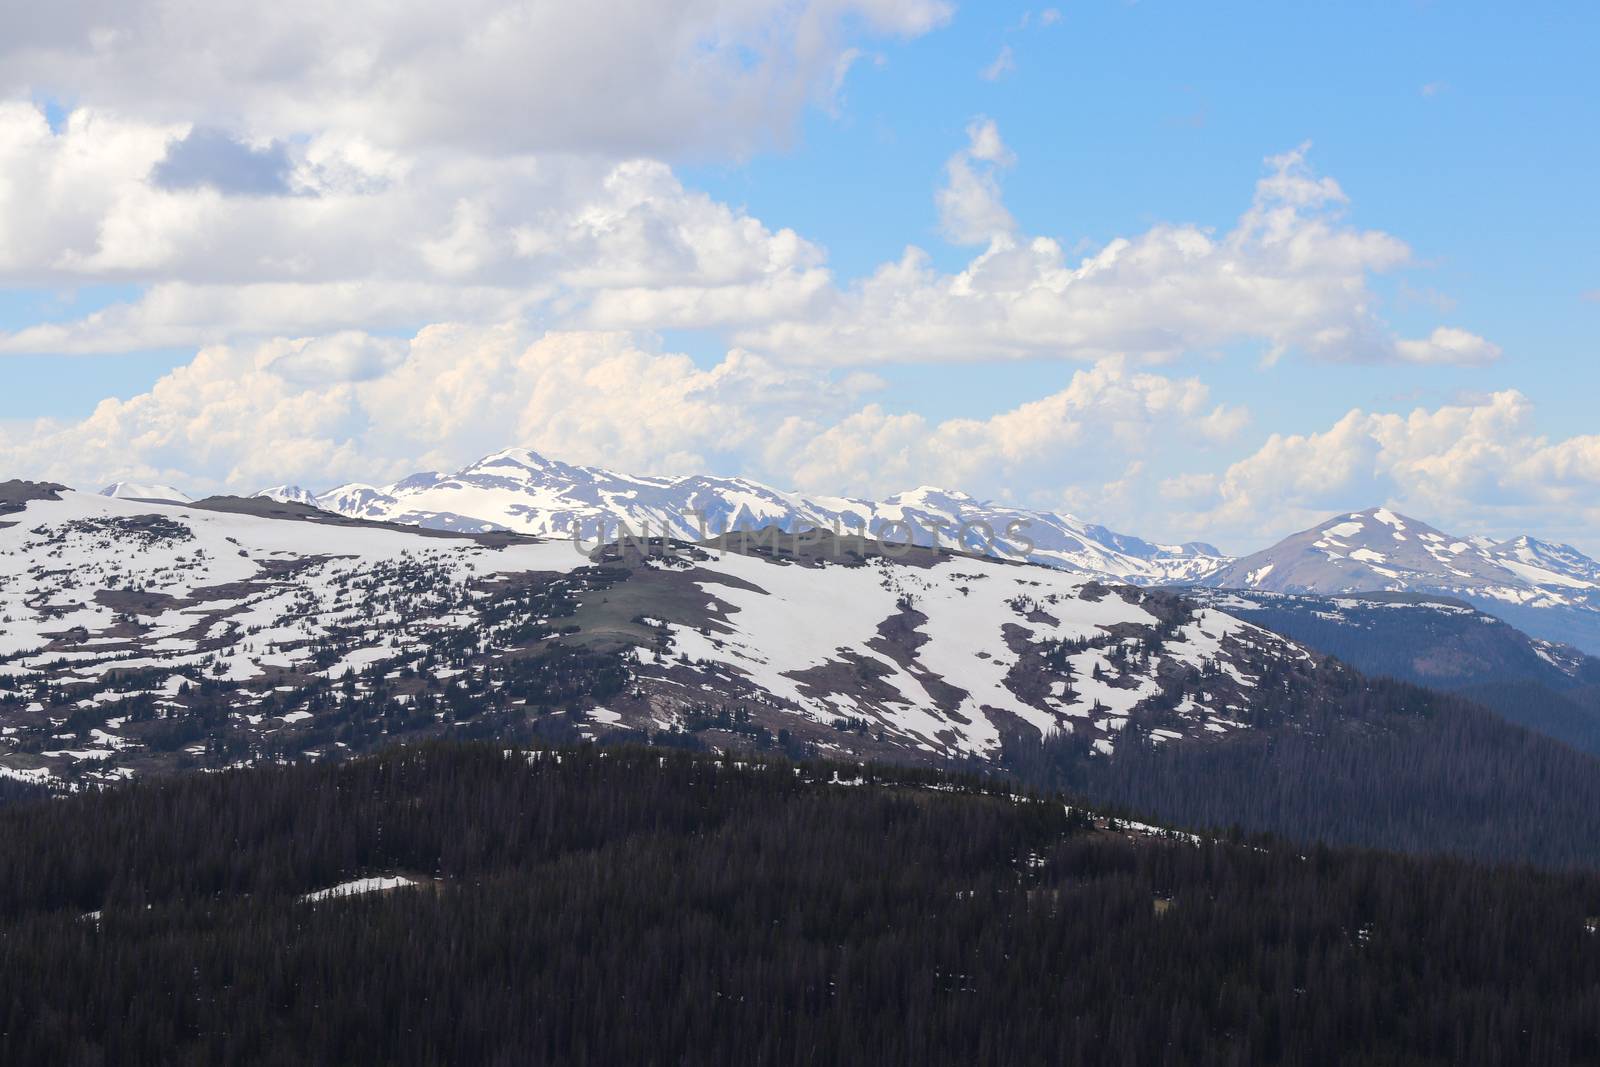 The Colorado mountain snowy covered peaks summer 2019 by gena_wells